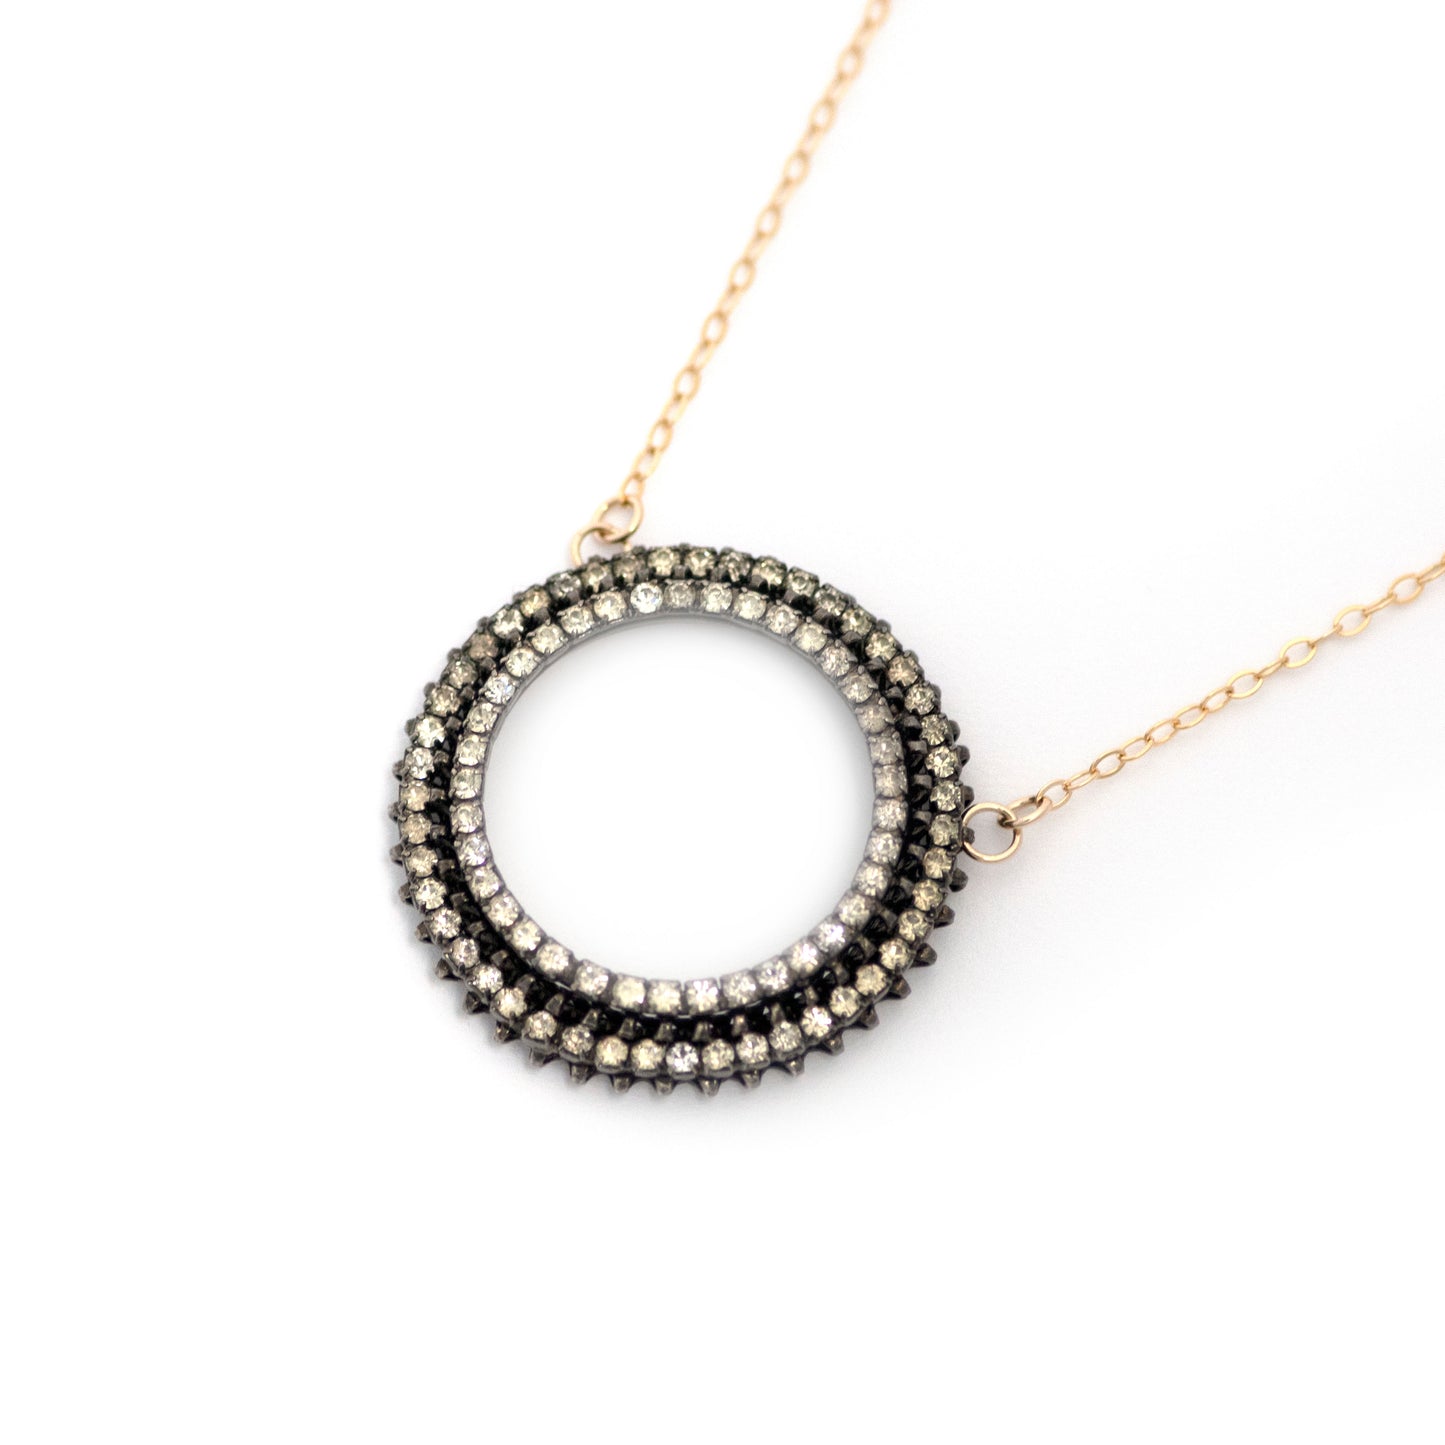 Vintage Black and Clear Rhinestone Circle Necklace